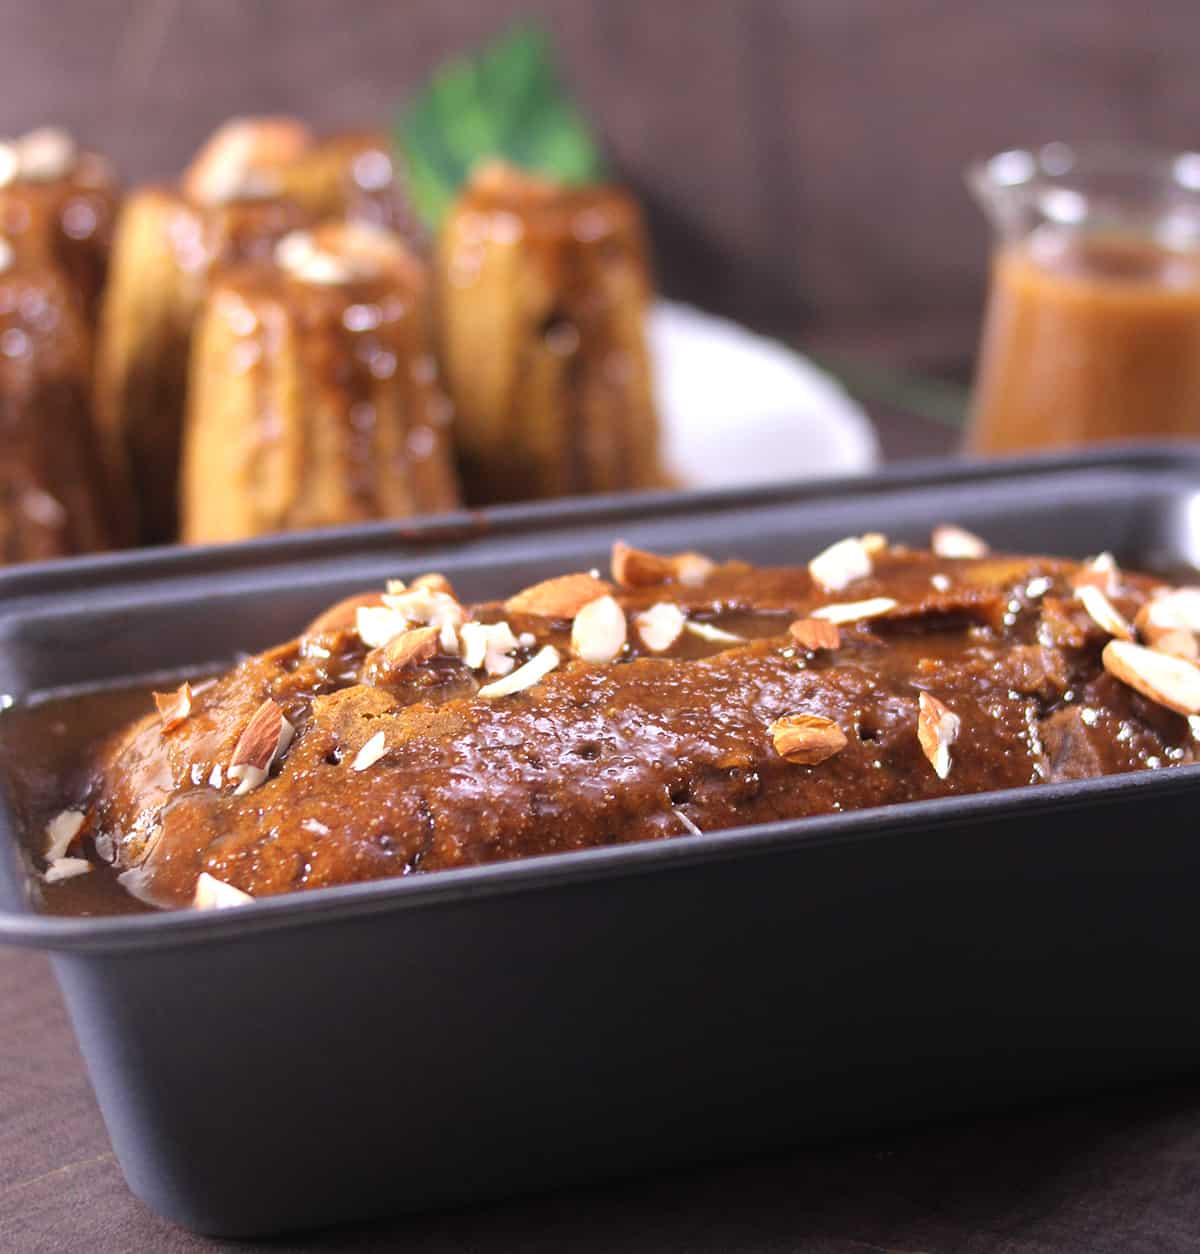 toffee pudding cake recipe or best date pudding dessert with caramel toffee sauce or butterscotch